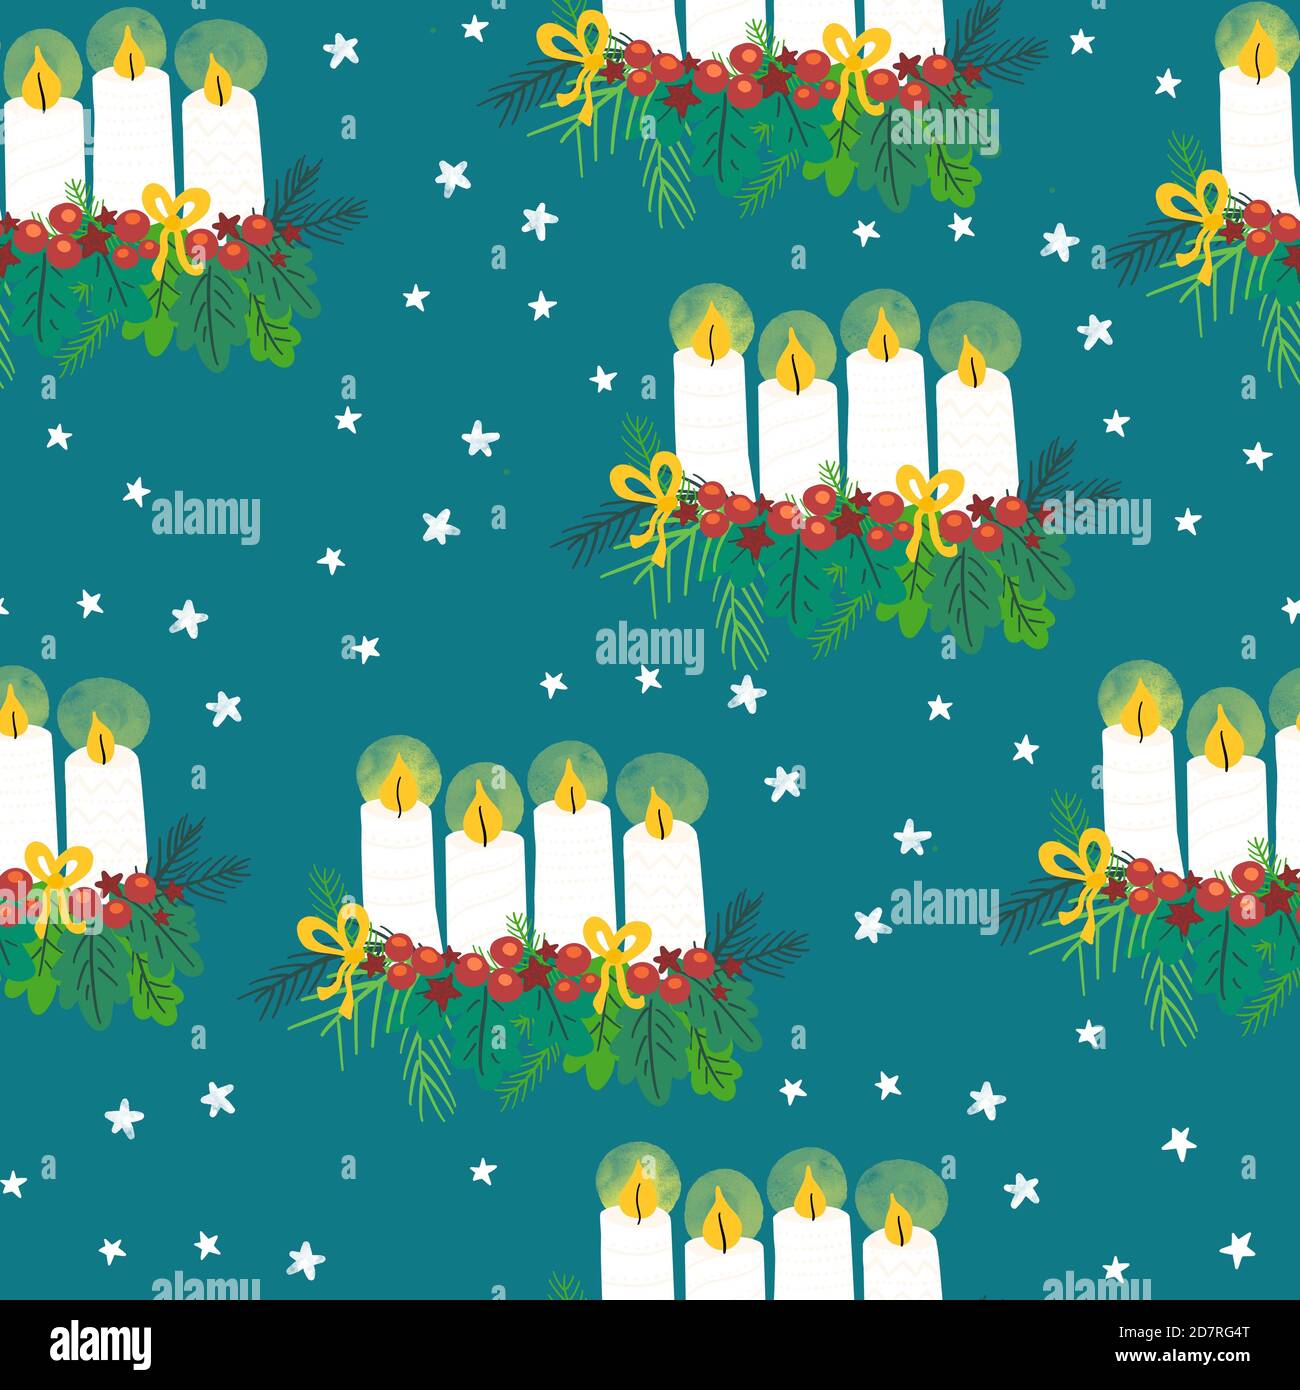 Christmas Advent wreath seamless pattern. Christmas arrangements with 4 candles, bows, berries and pine branches repeating background. German holiday Stock Photo